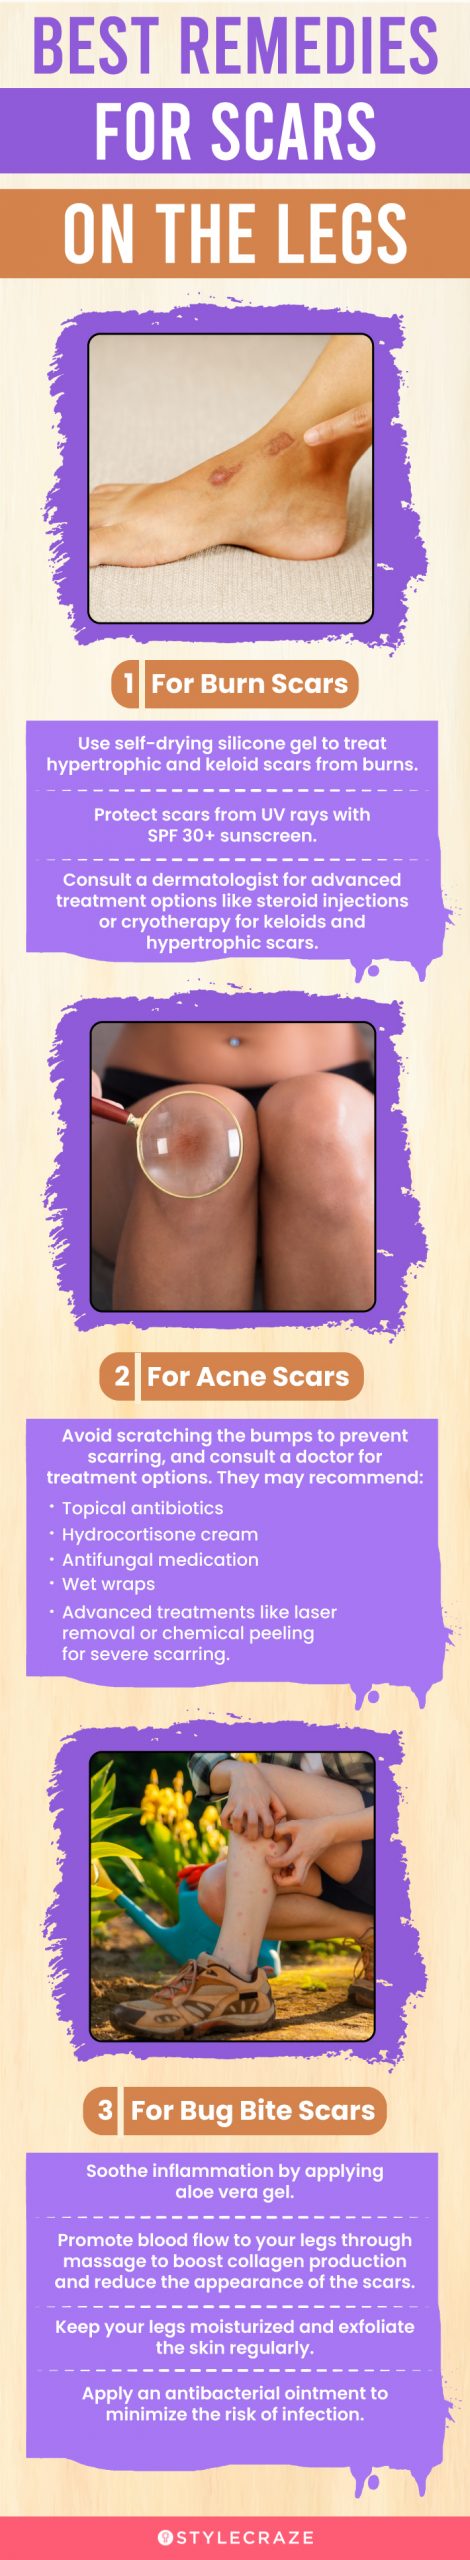 best remedies for leg scars (infographic)